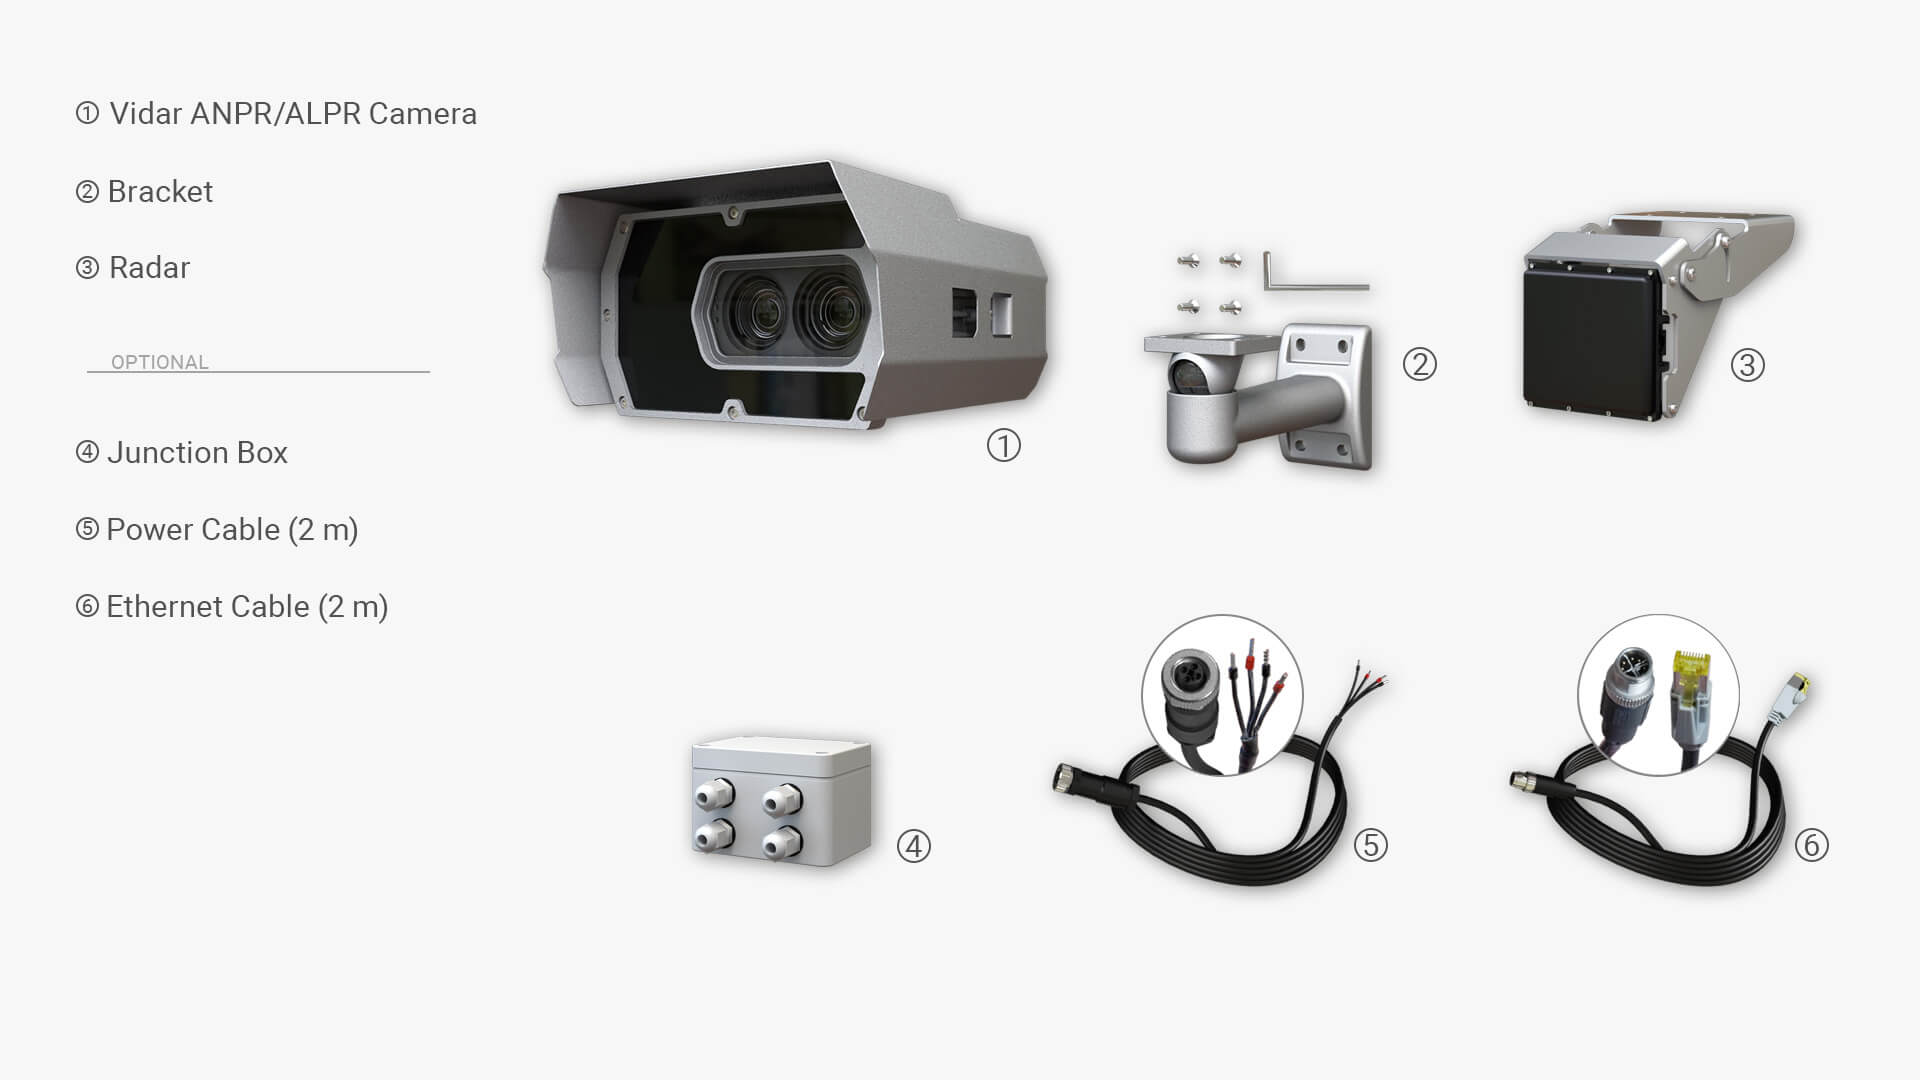 Included and optional parts of Vidar speed enforcement camera